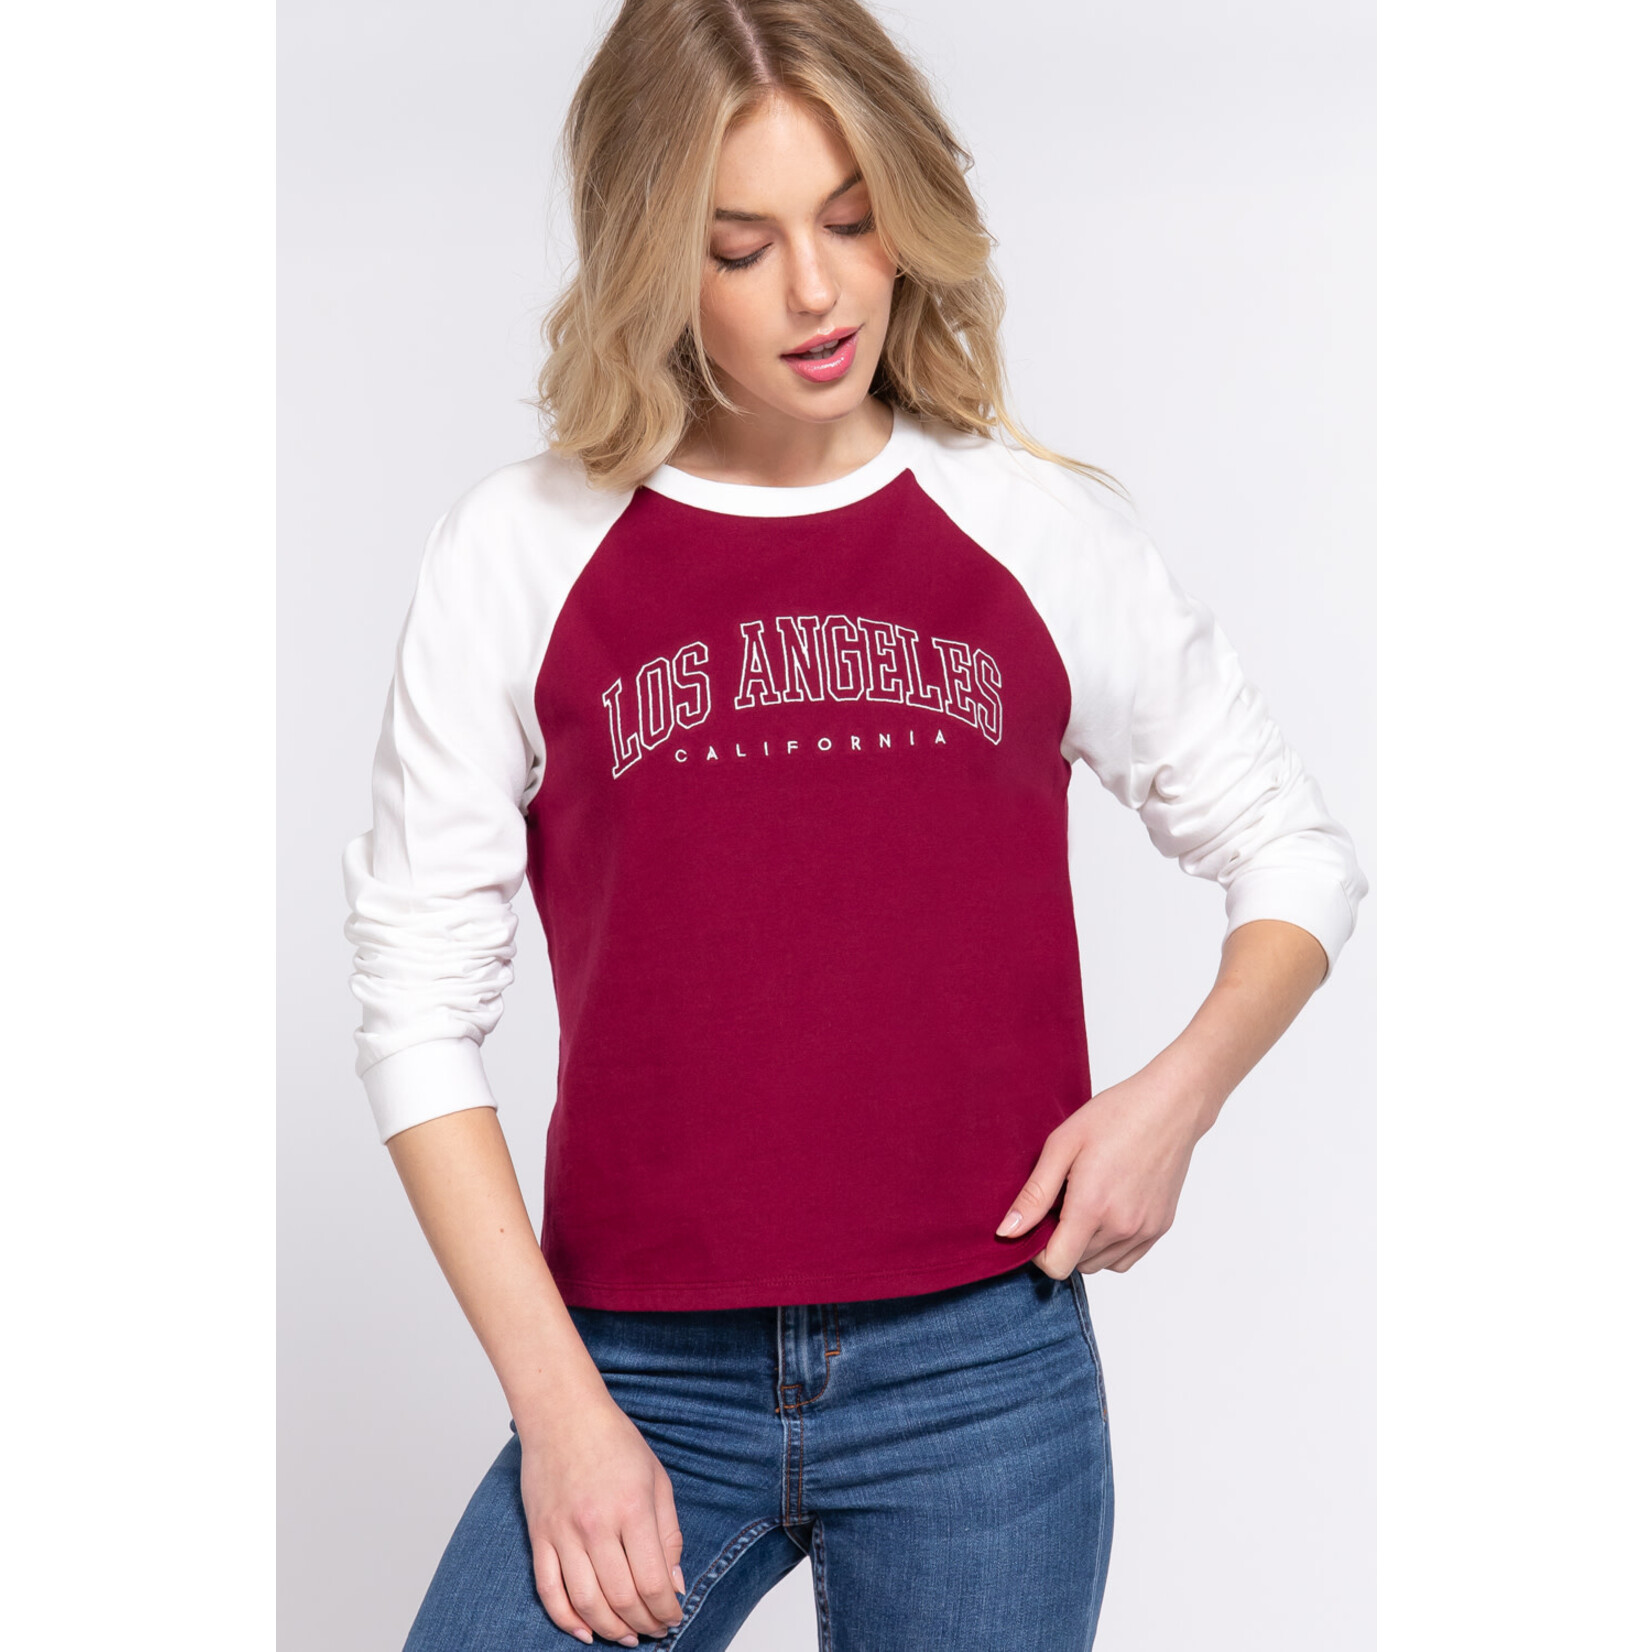 ACTIVE USA, INC. Long Sleeve Los Angeles Embo Knit Top - T13601